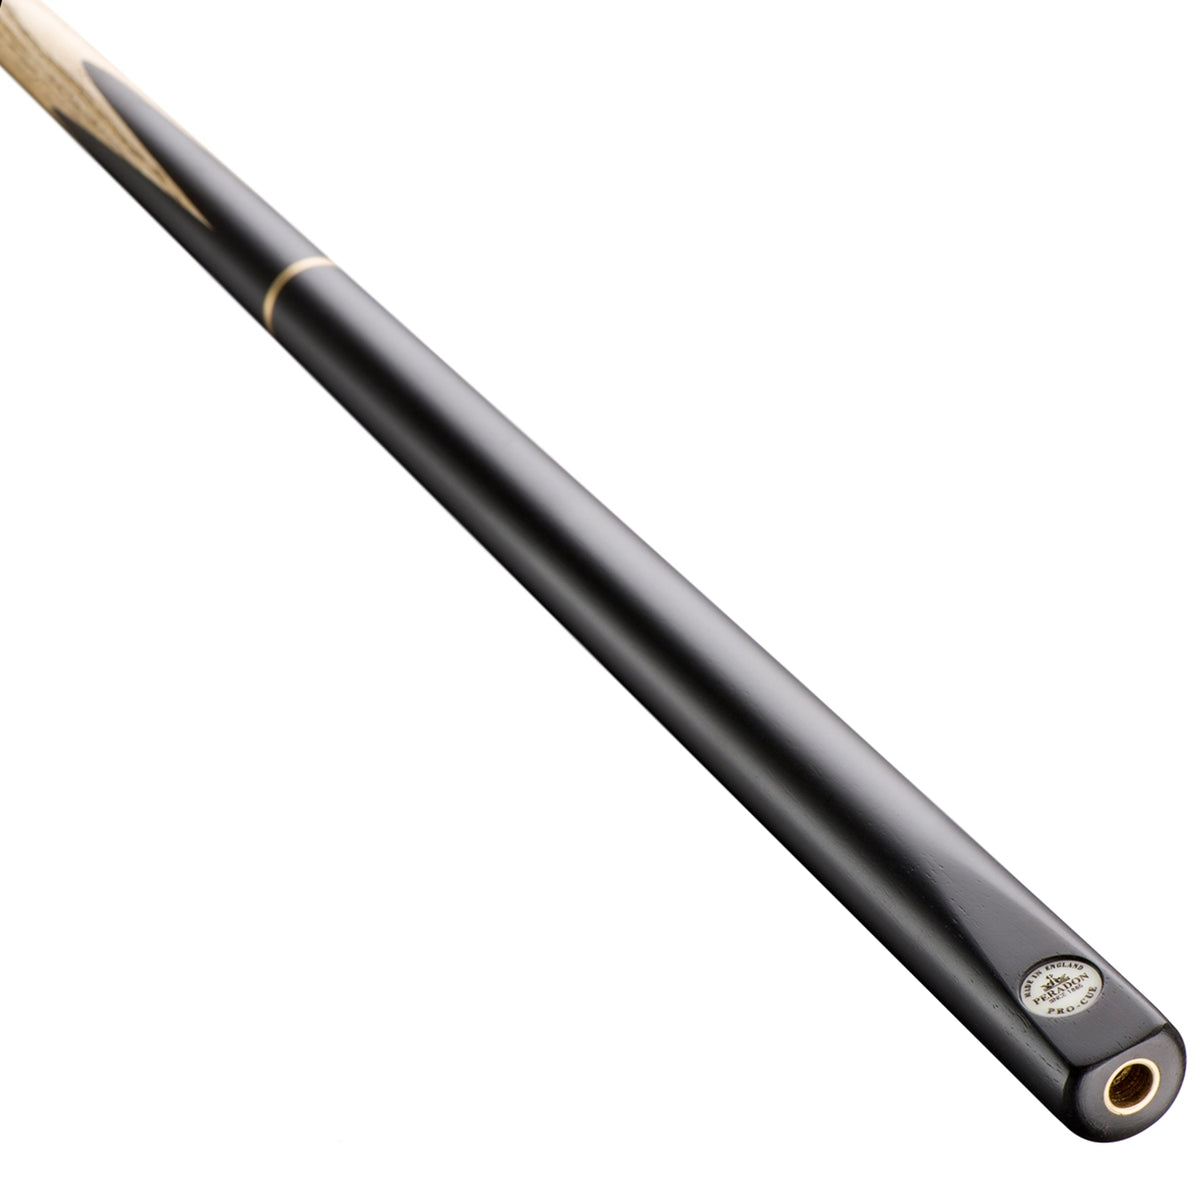 Peradon Pro-Cue 3/4 Jointed Snooker Cue. On angle view